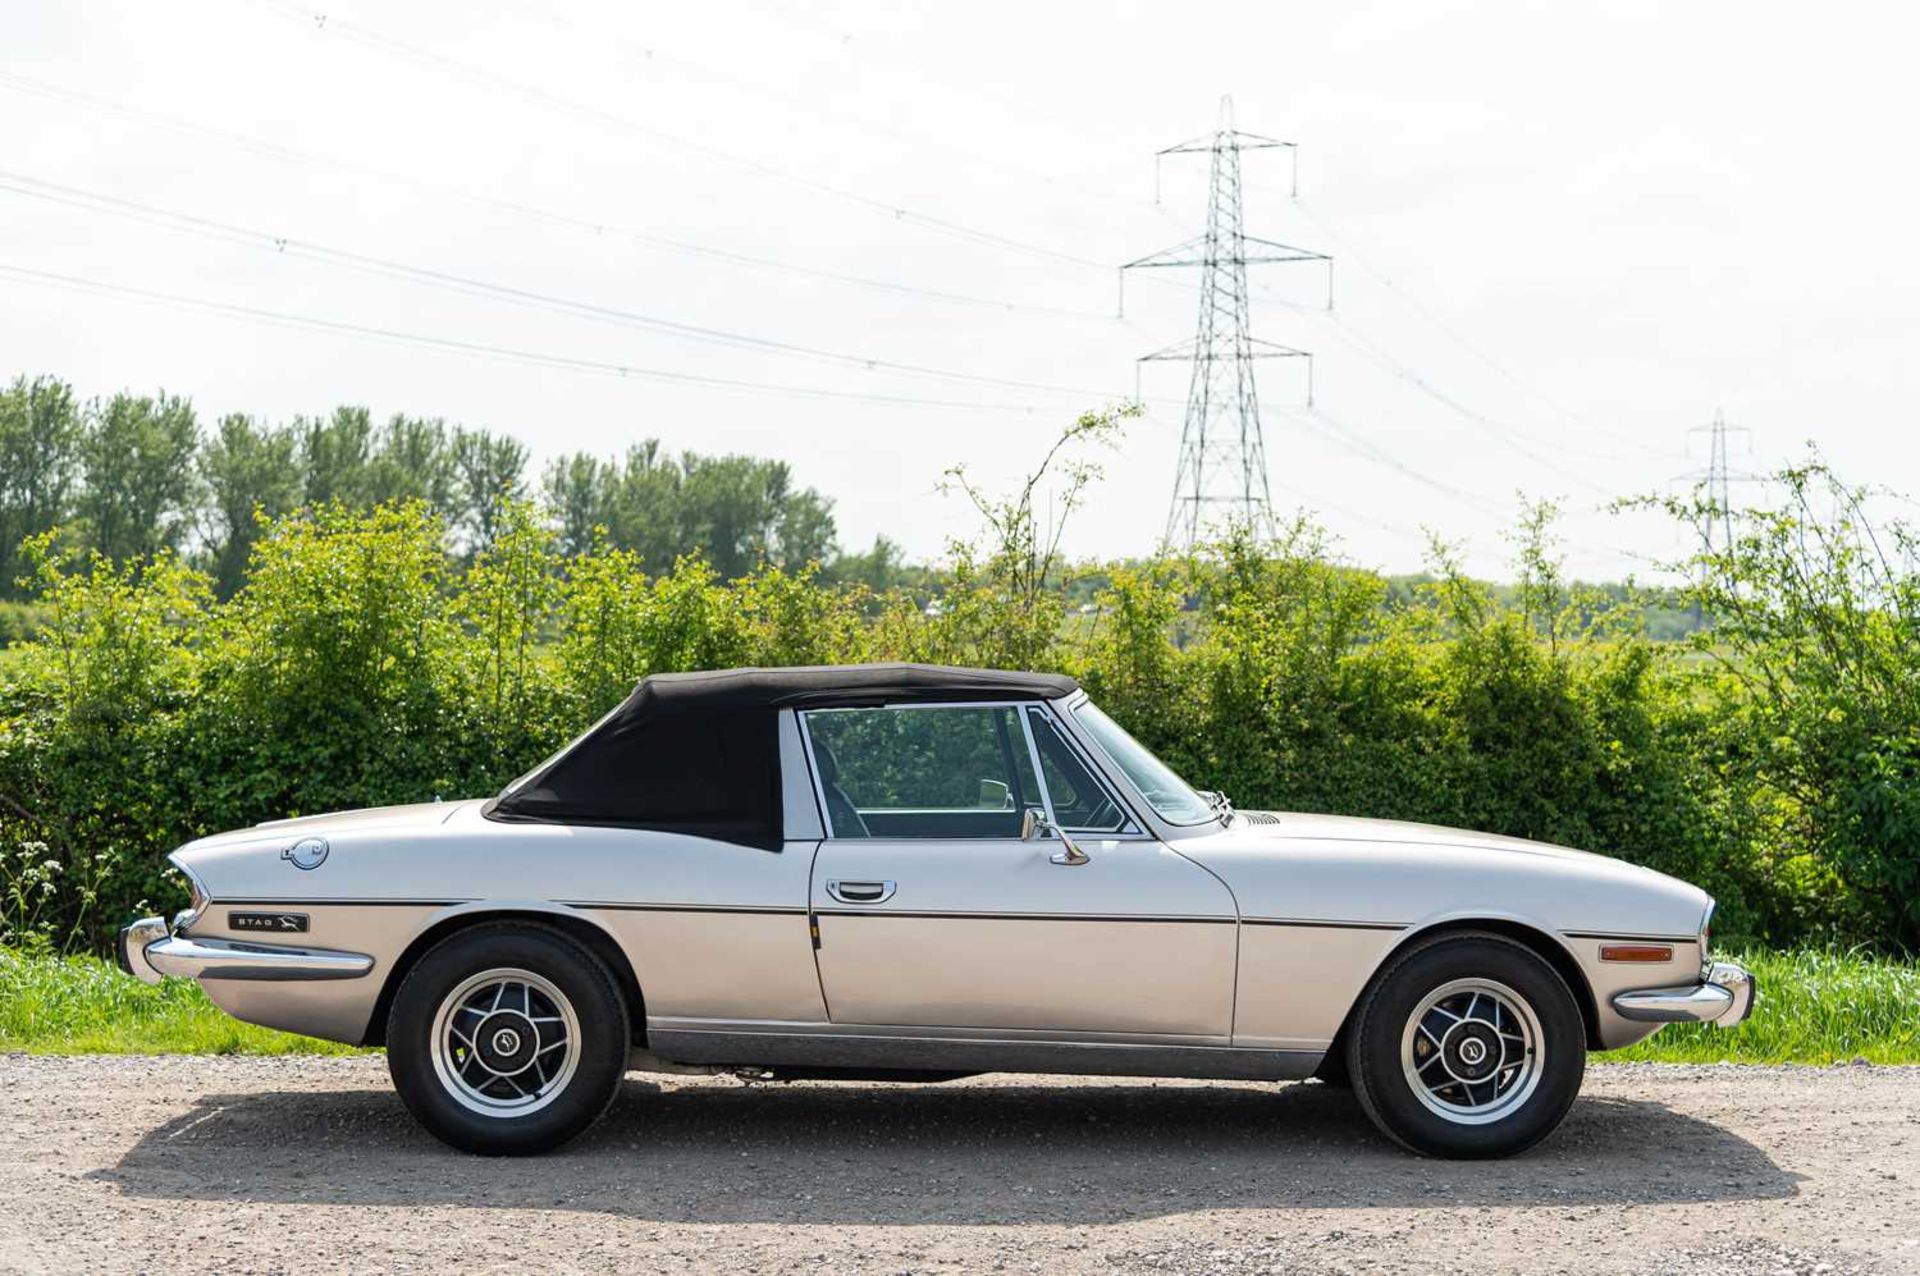 1974 Triumph Stag ***NO RESERVE*** Fully-restored example, equipped with manual overdrive transmissi - Image 7 of 83